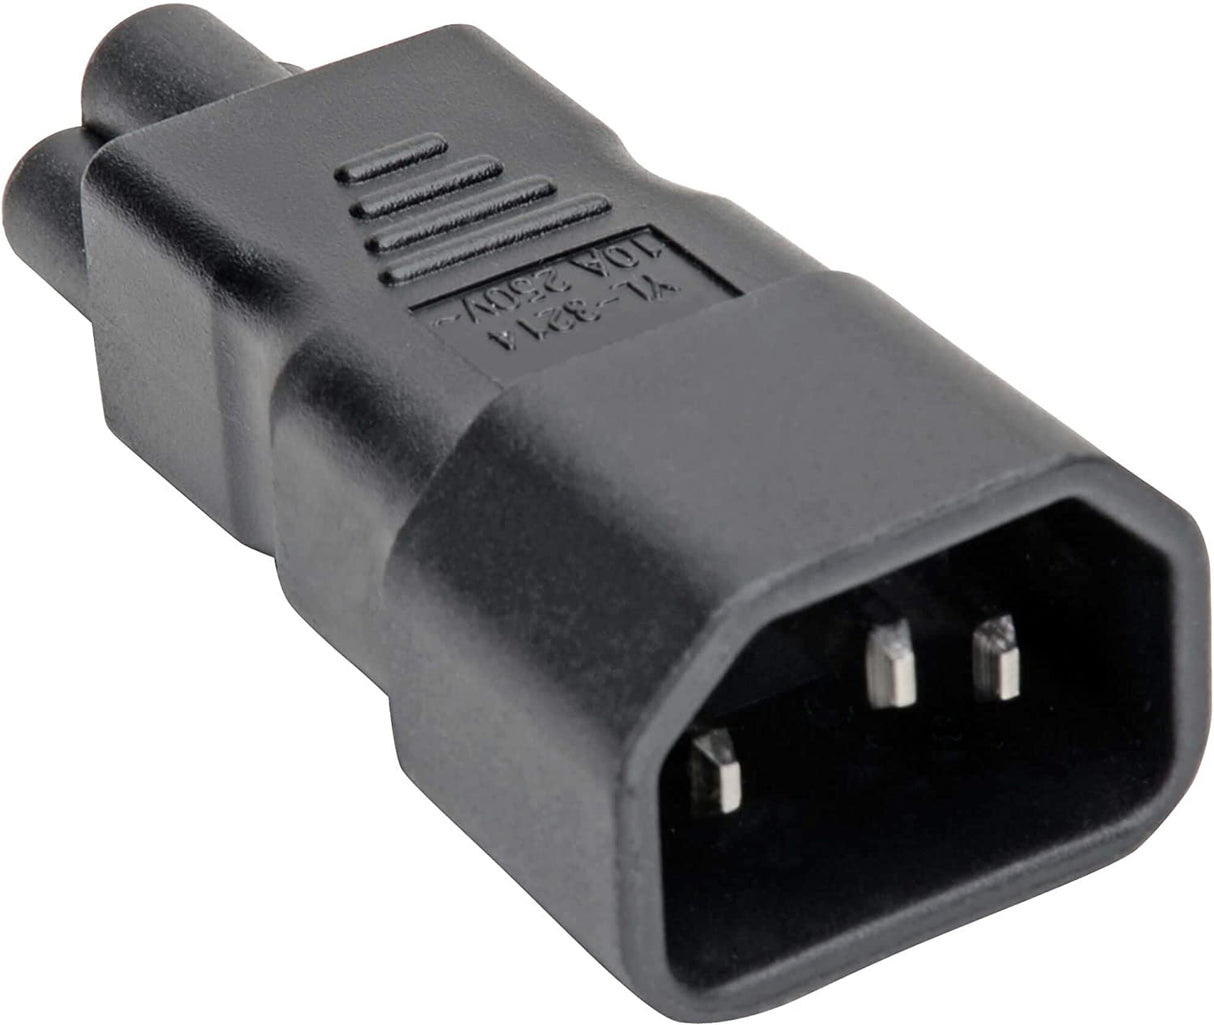 Tripp Lite Power Cord Adapter (C14 to C5 Adapter), 10A, 250V, Black, (P014-000)